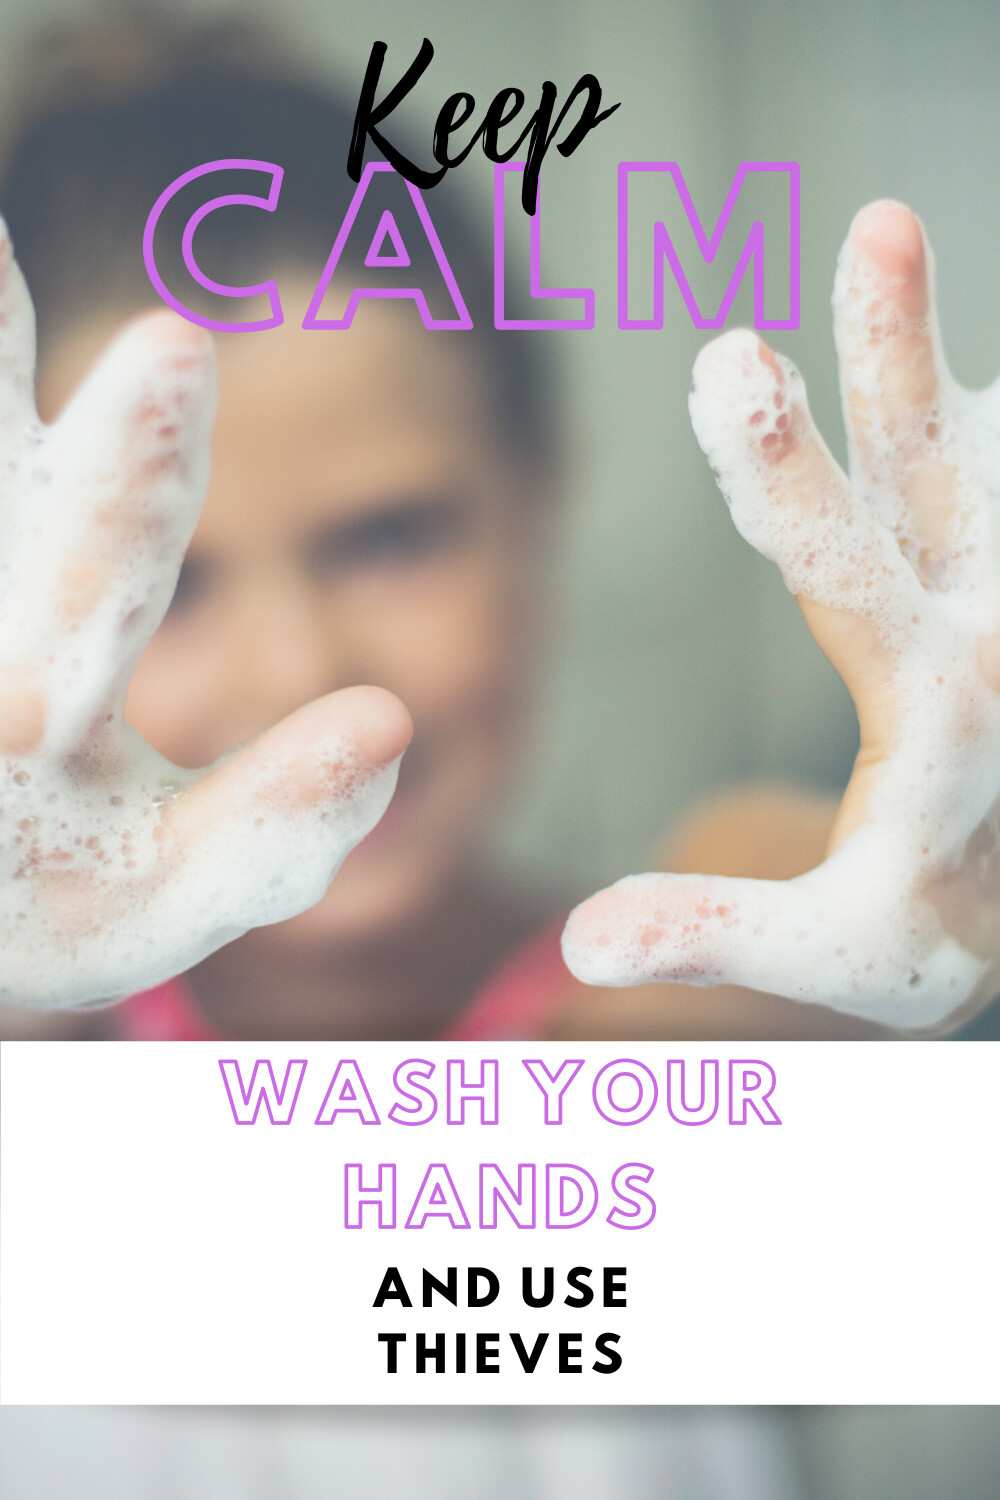 Keep Calm, Wash Your Hands and Use Thieves